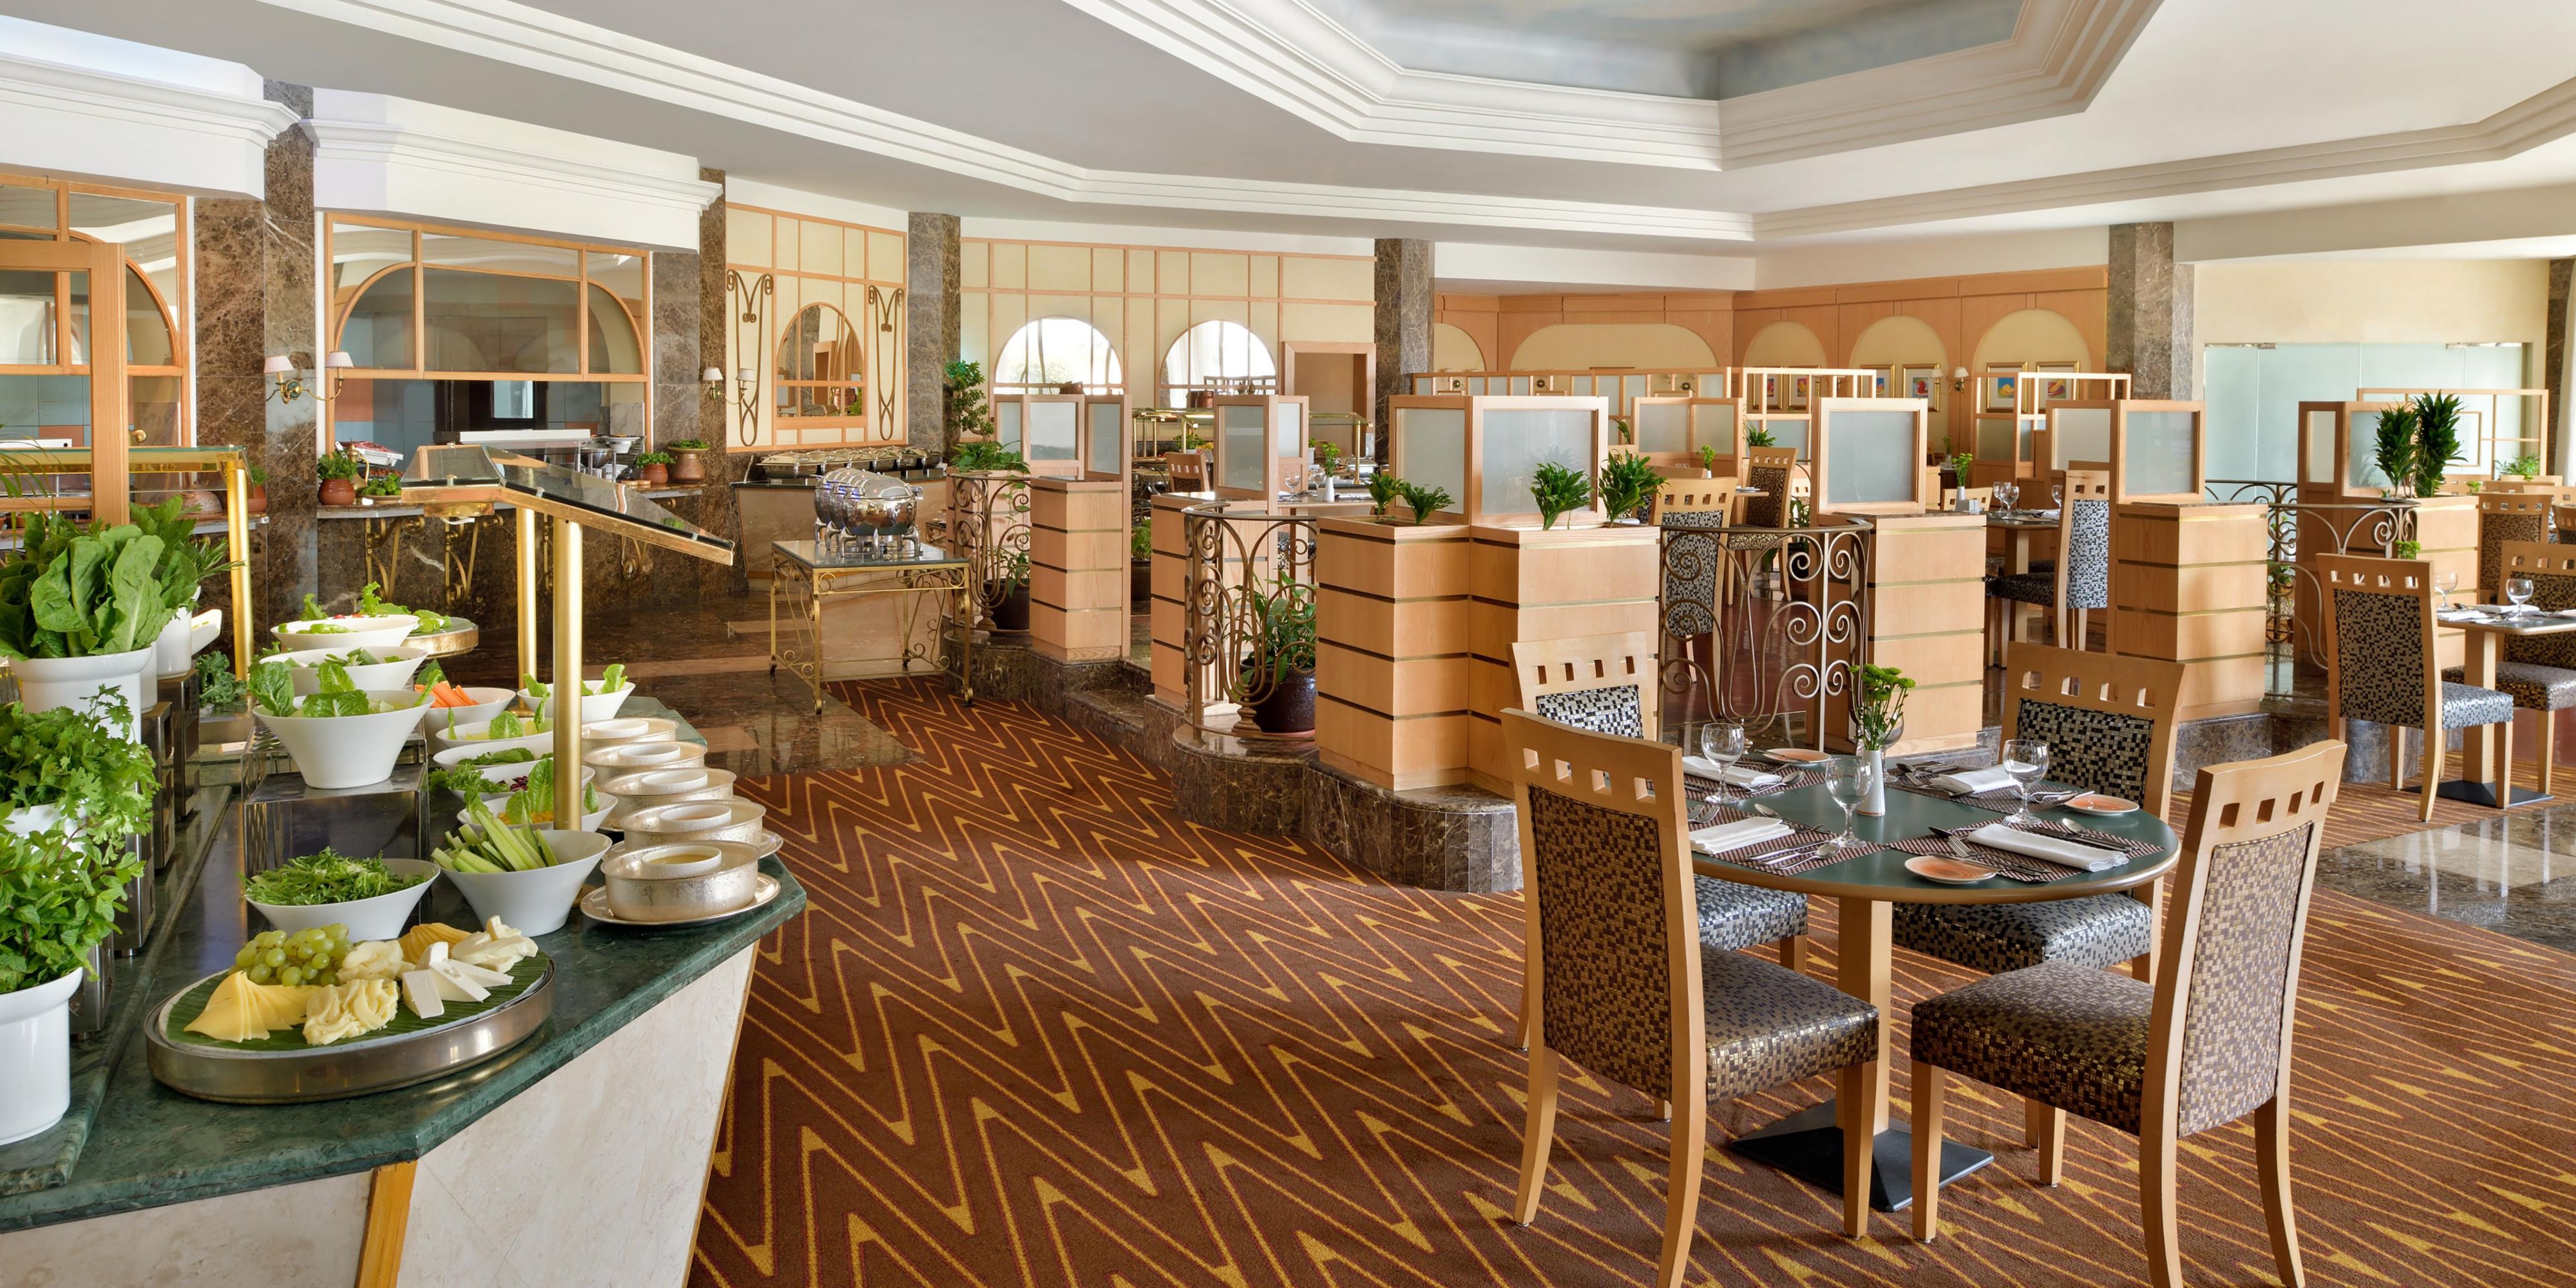 Savour the finest buffet for breakfast, lunch and dinner at Al Ferdaus restaurant which is located at the hotel's lobby.